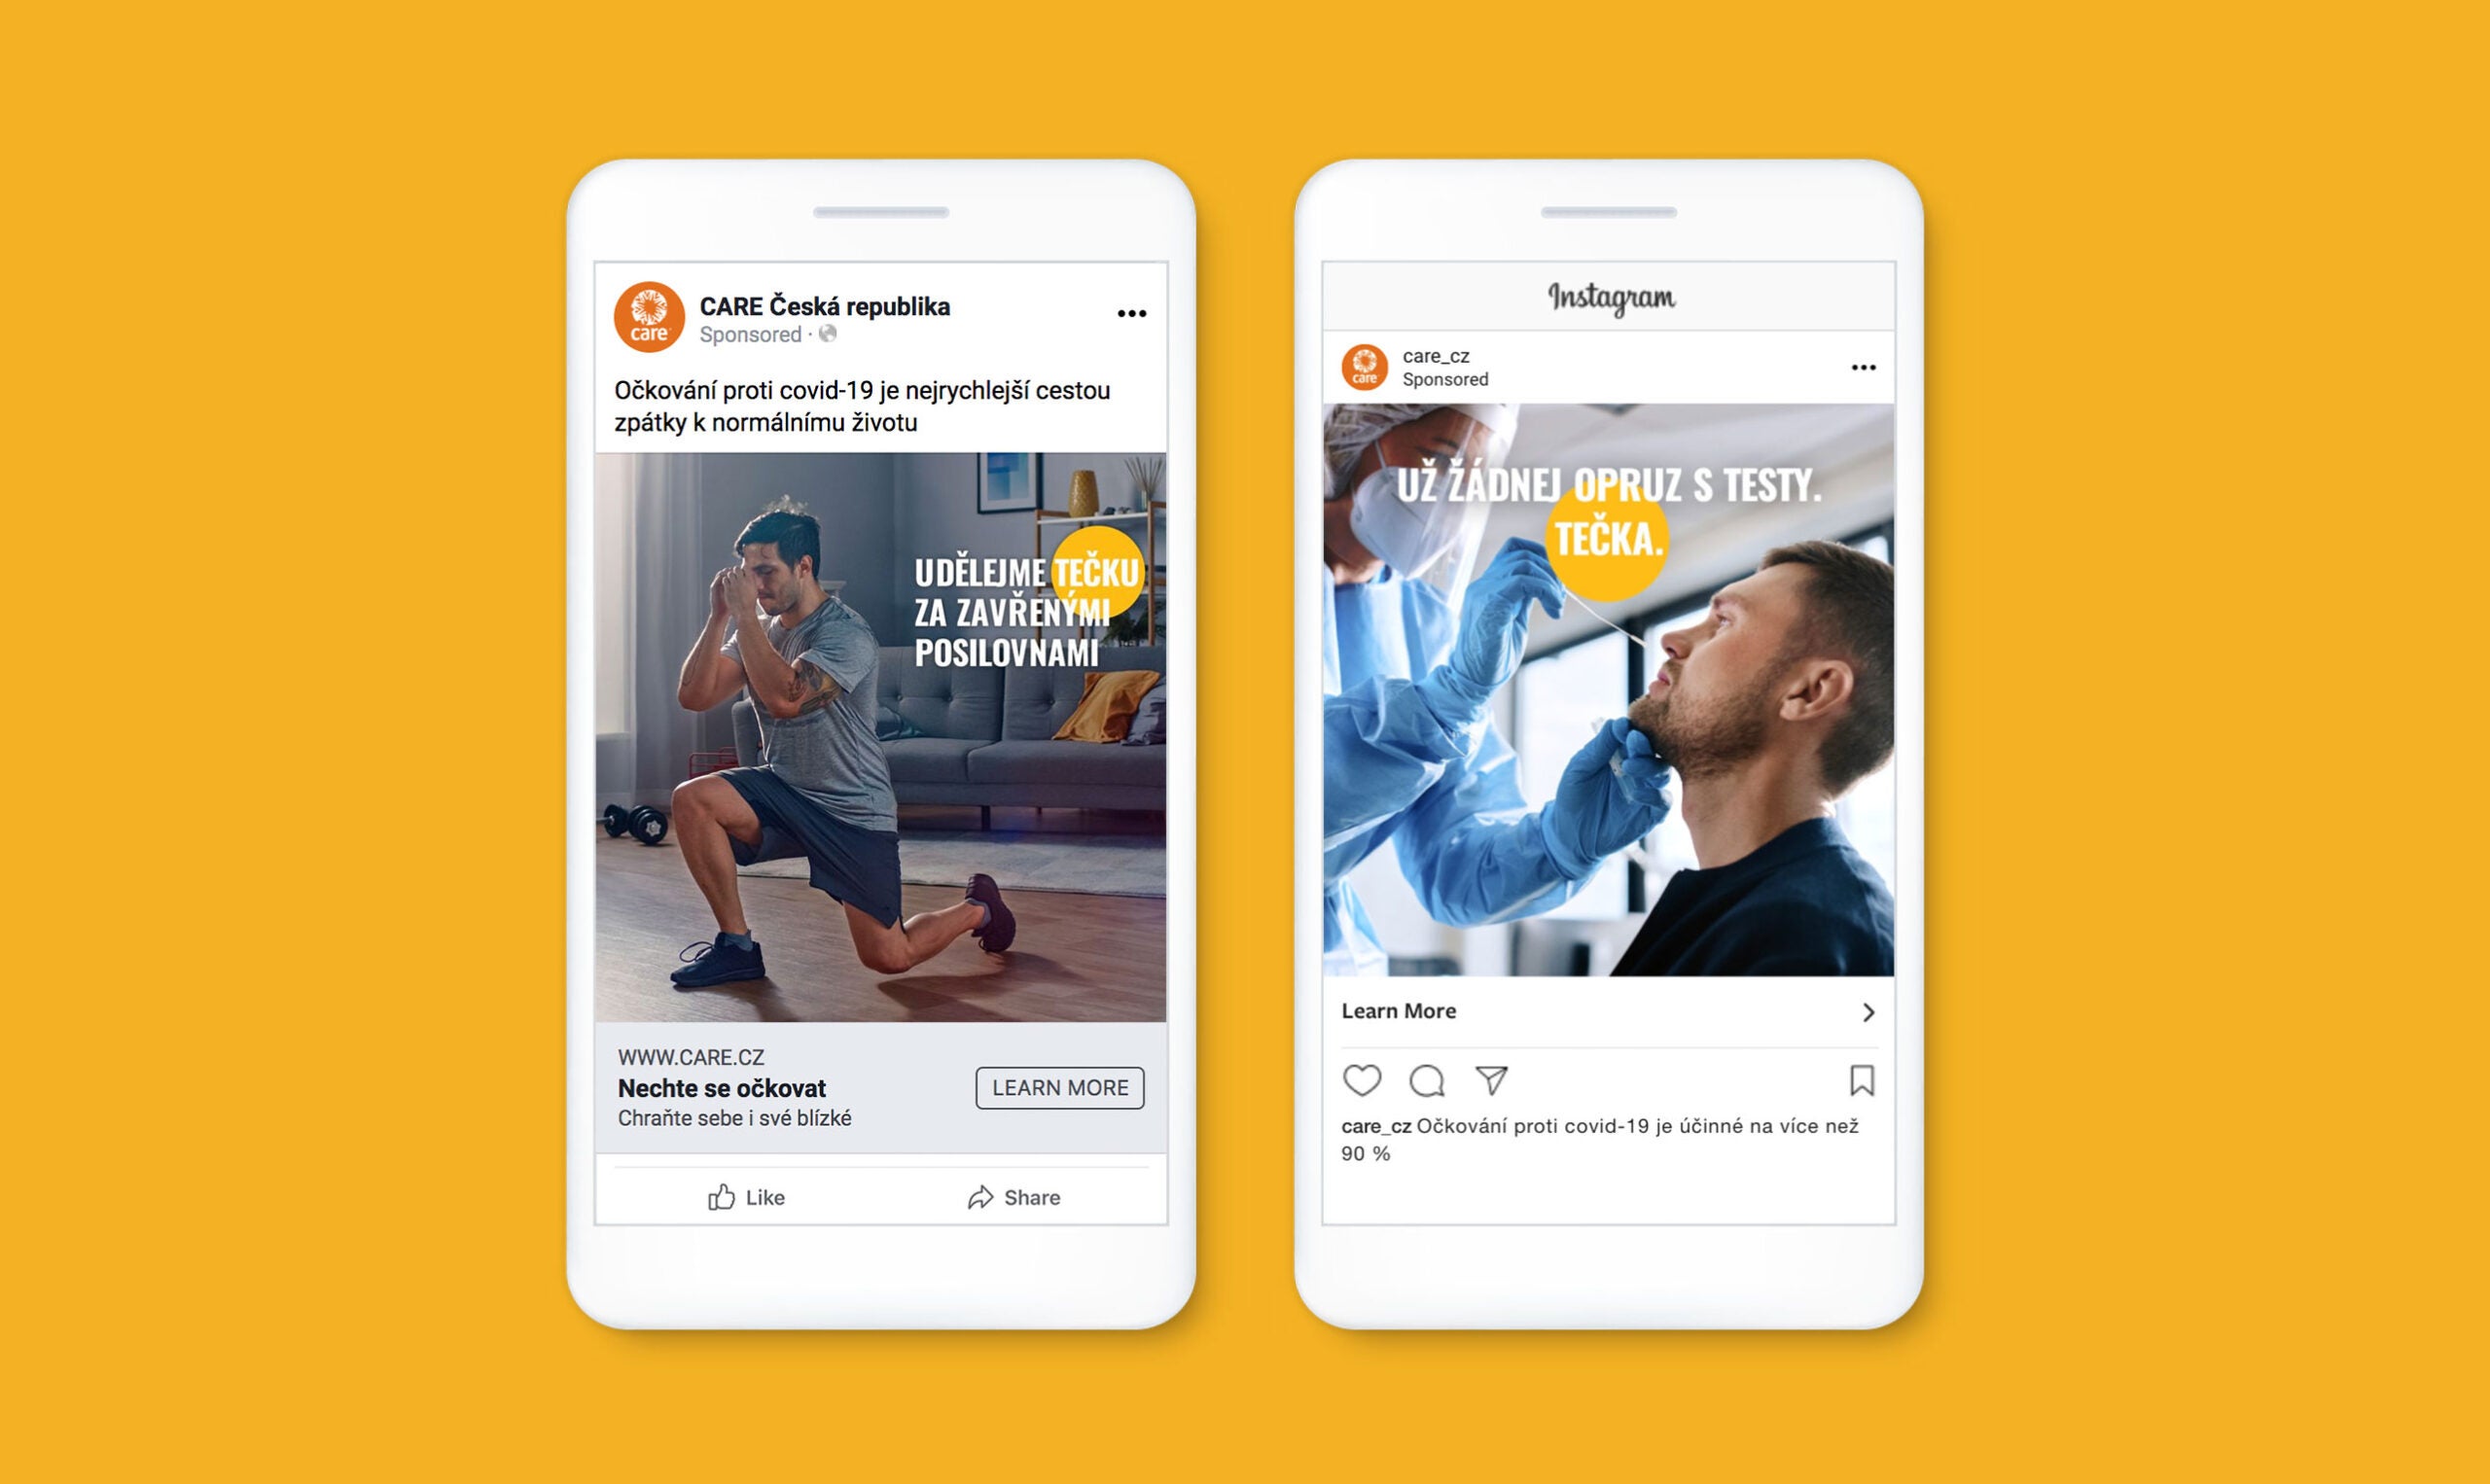 A mockup of two iPhones showing Facebook and Instagram posts encouraging people to get the vaccine.